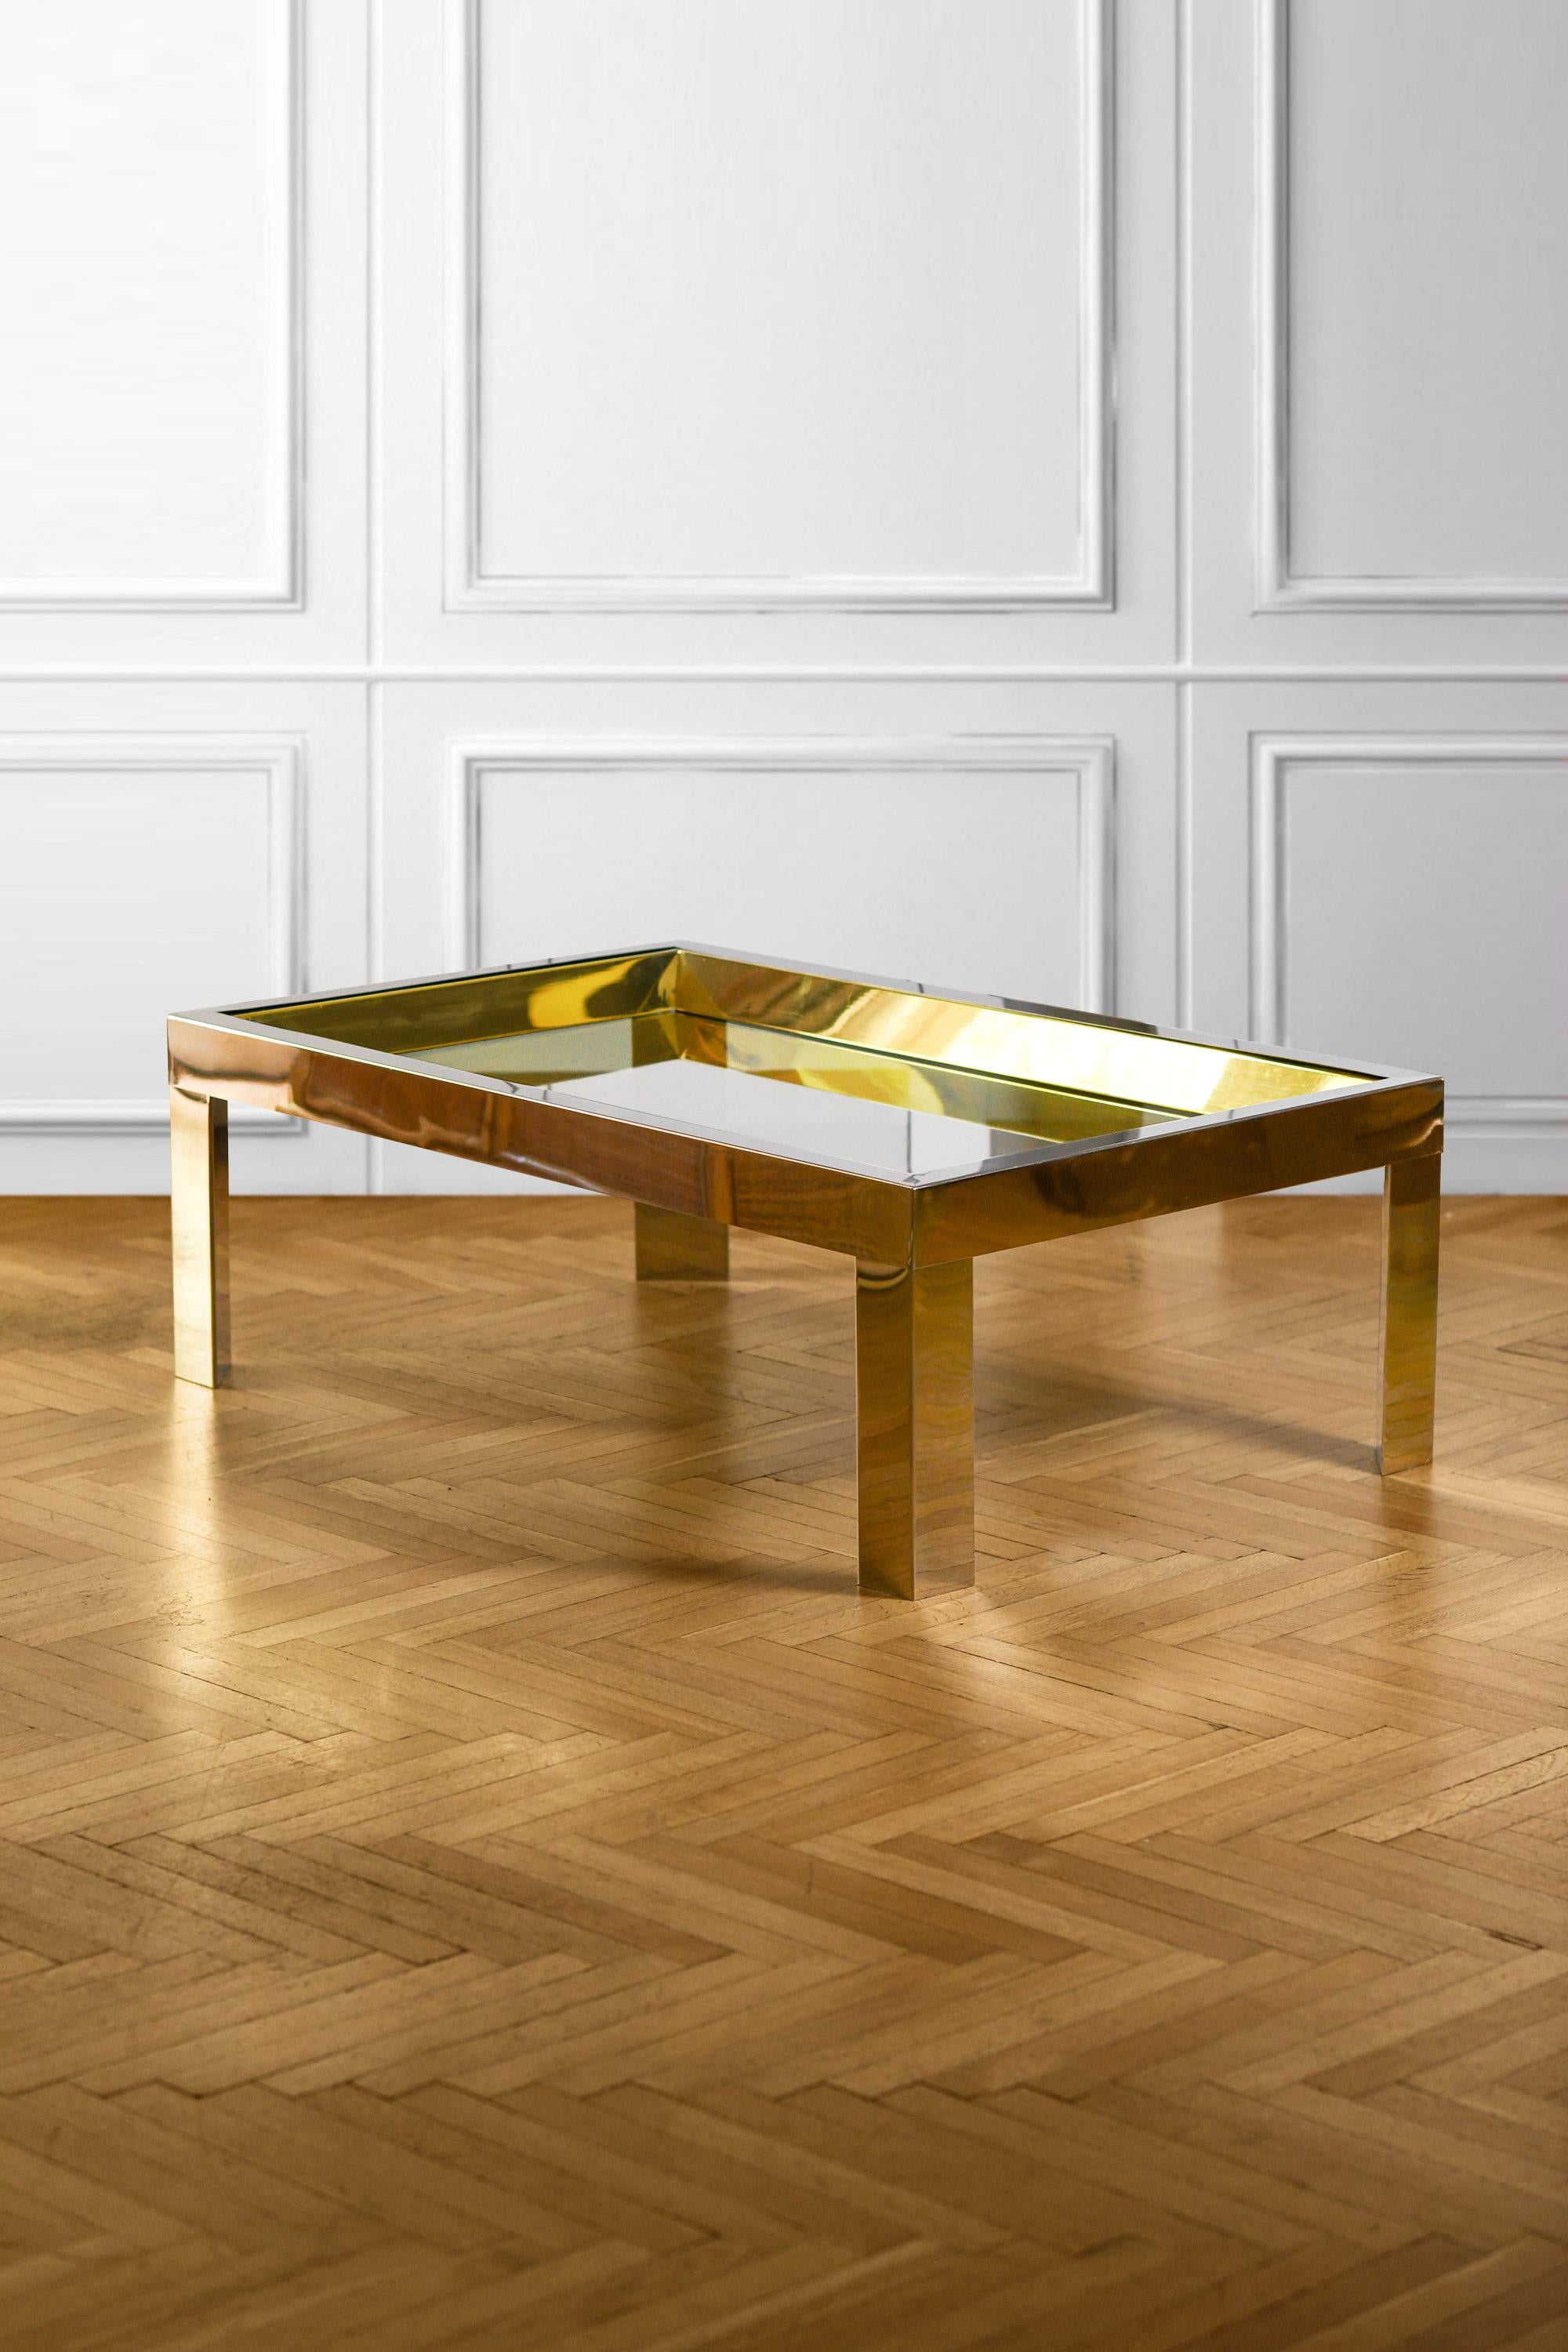 Coffee table in brass and chromed metal with glass top, Italy 1970
Product details
Dimensions: 120 W x 41 H x 75 D
Italian production from the 70s.